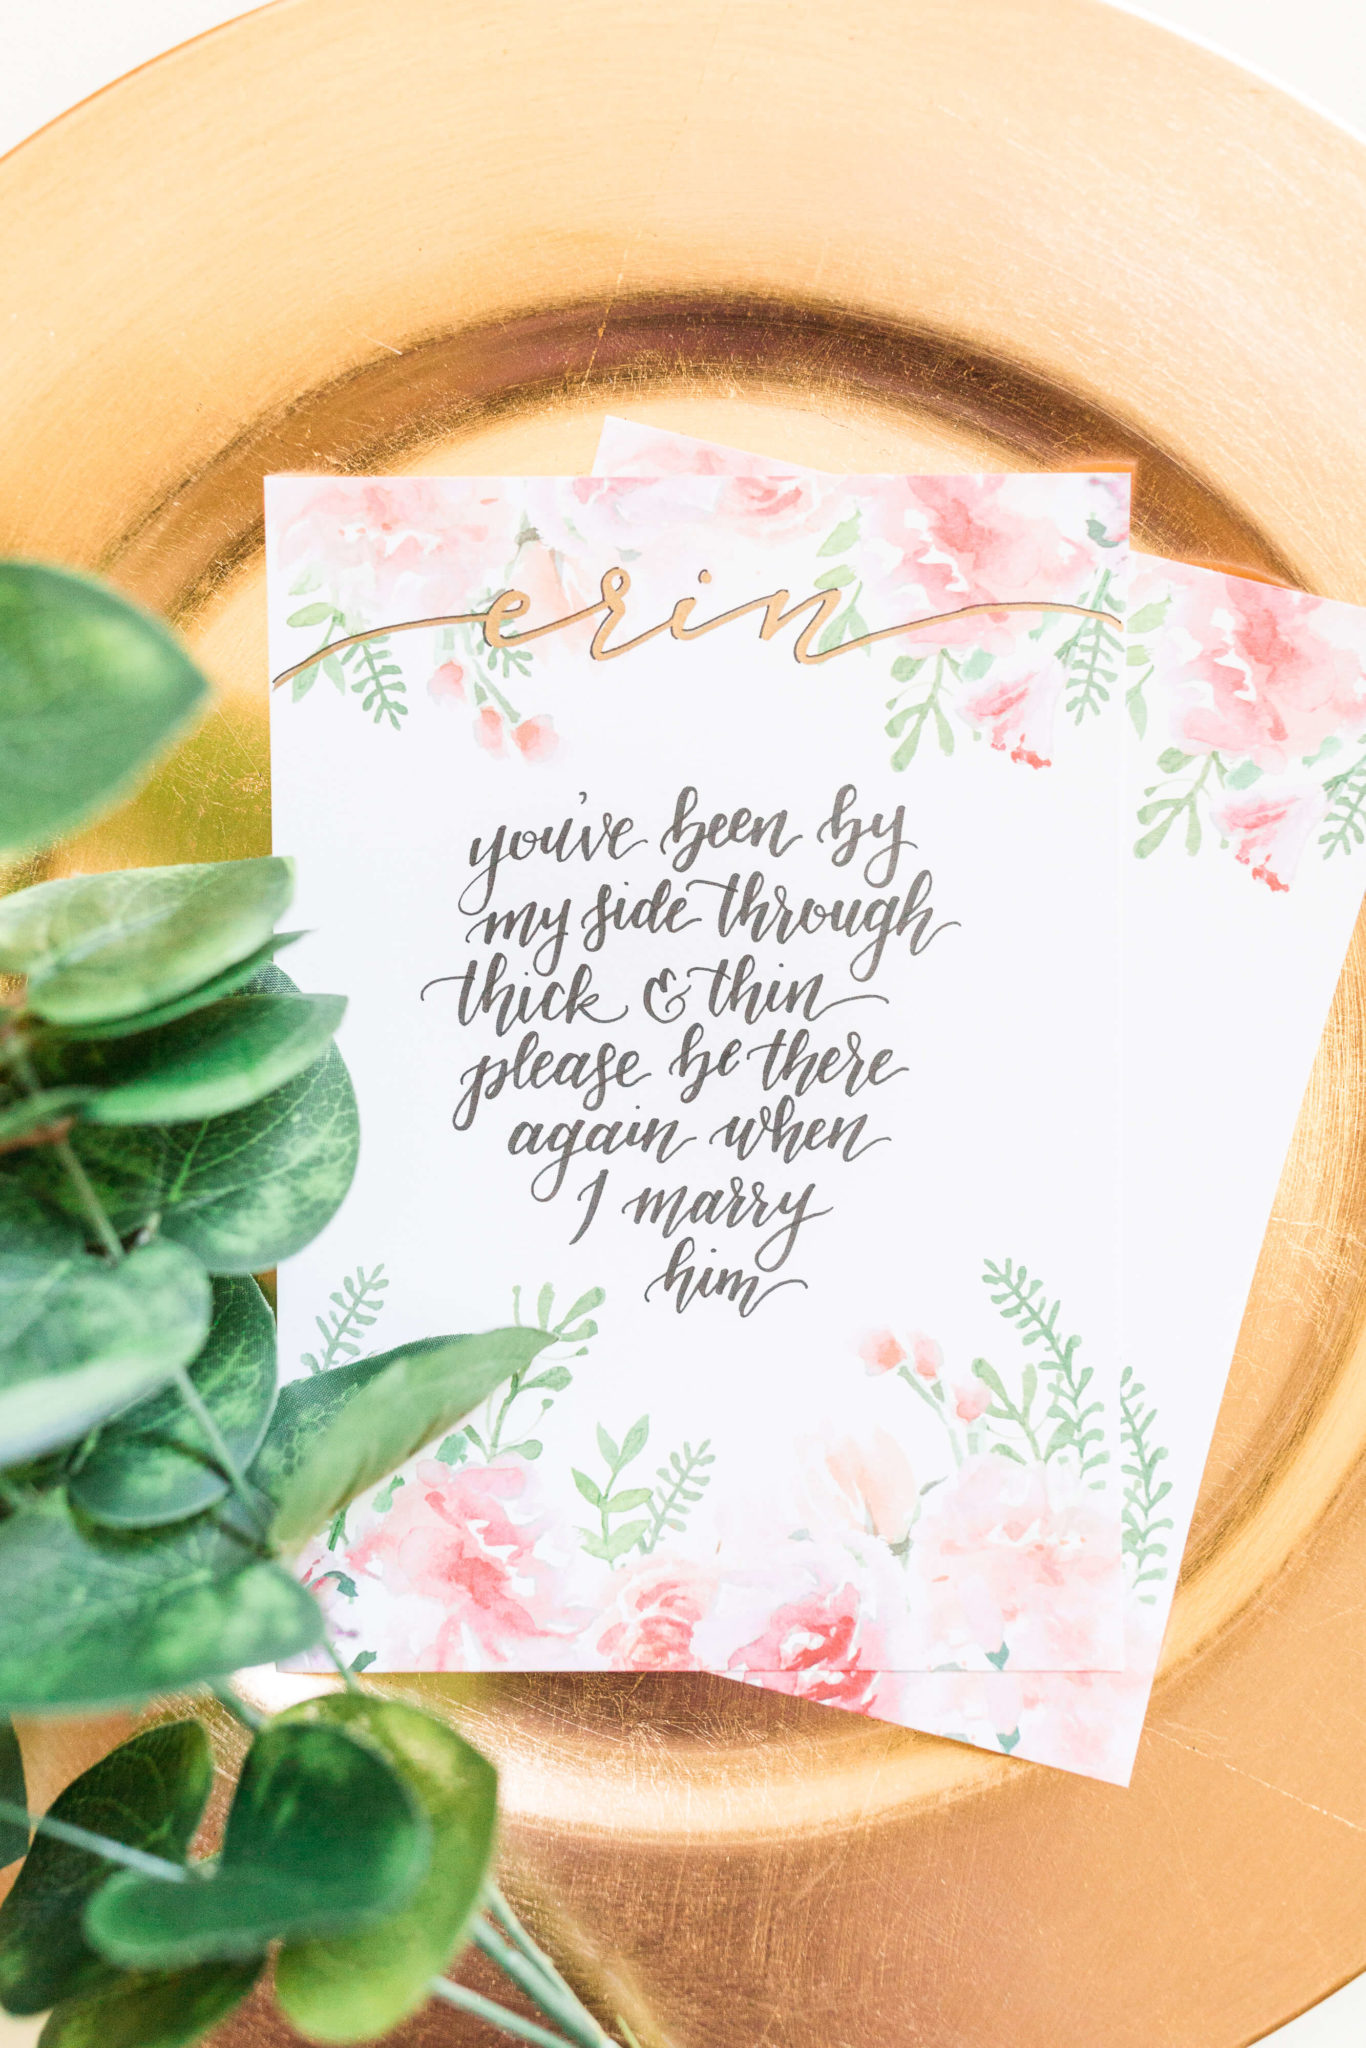 A floral bridal party invite lays on a gold plate with greenery